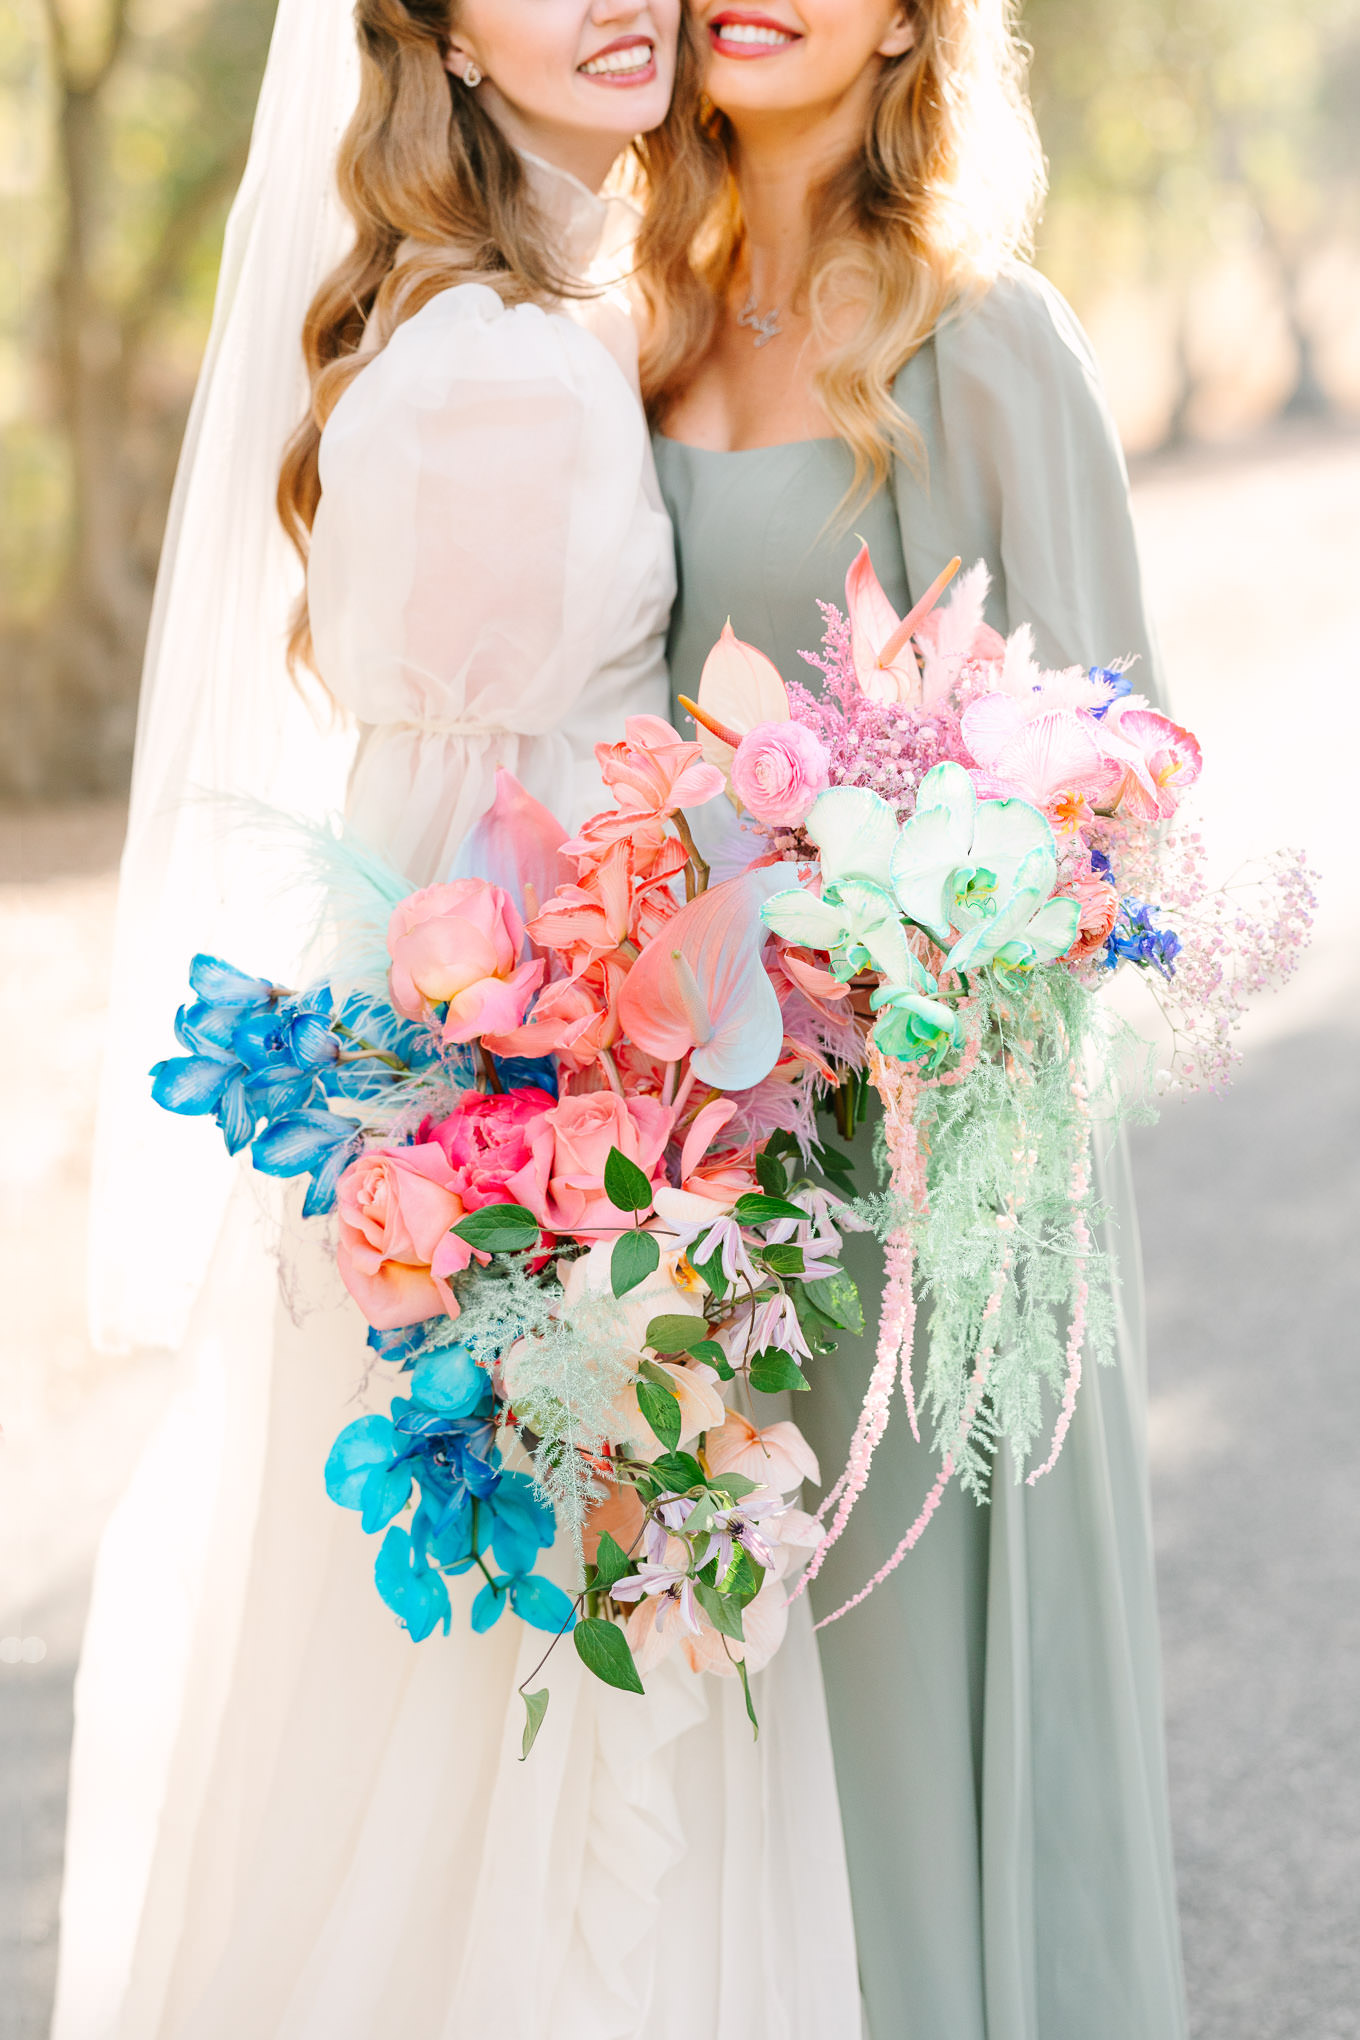 Colorful and whimsical bouquets | Colorful and quirky wedding at Higuera Ranch in San Luis Obispo | #sanluisobispowedding #californiawedding #higueraranch #madonnainn   
Source: Mary Costa Photography | Los Angeles